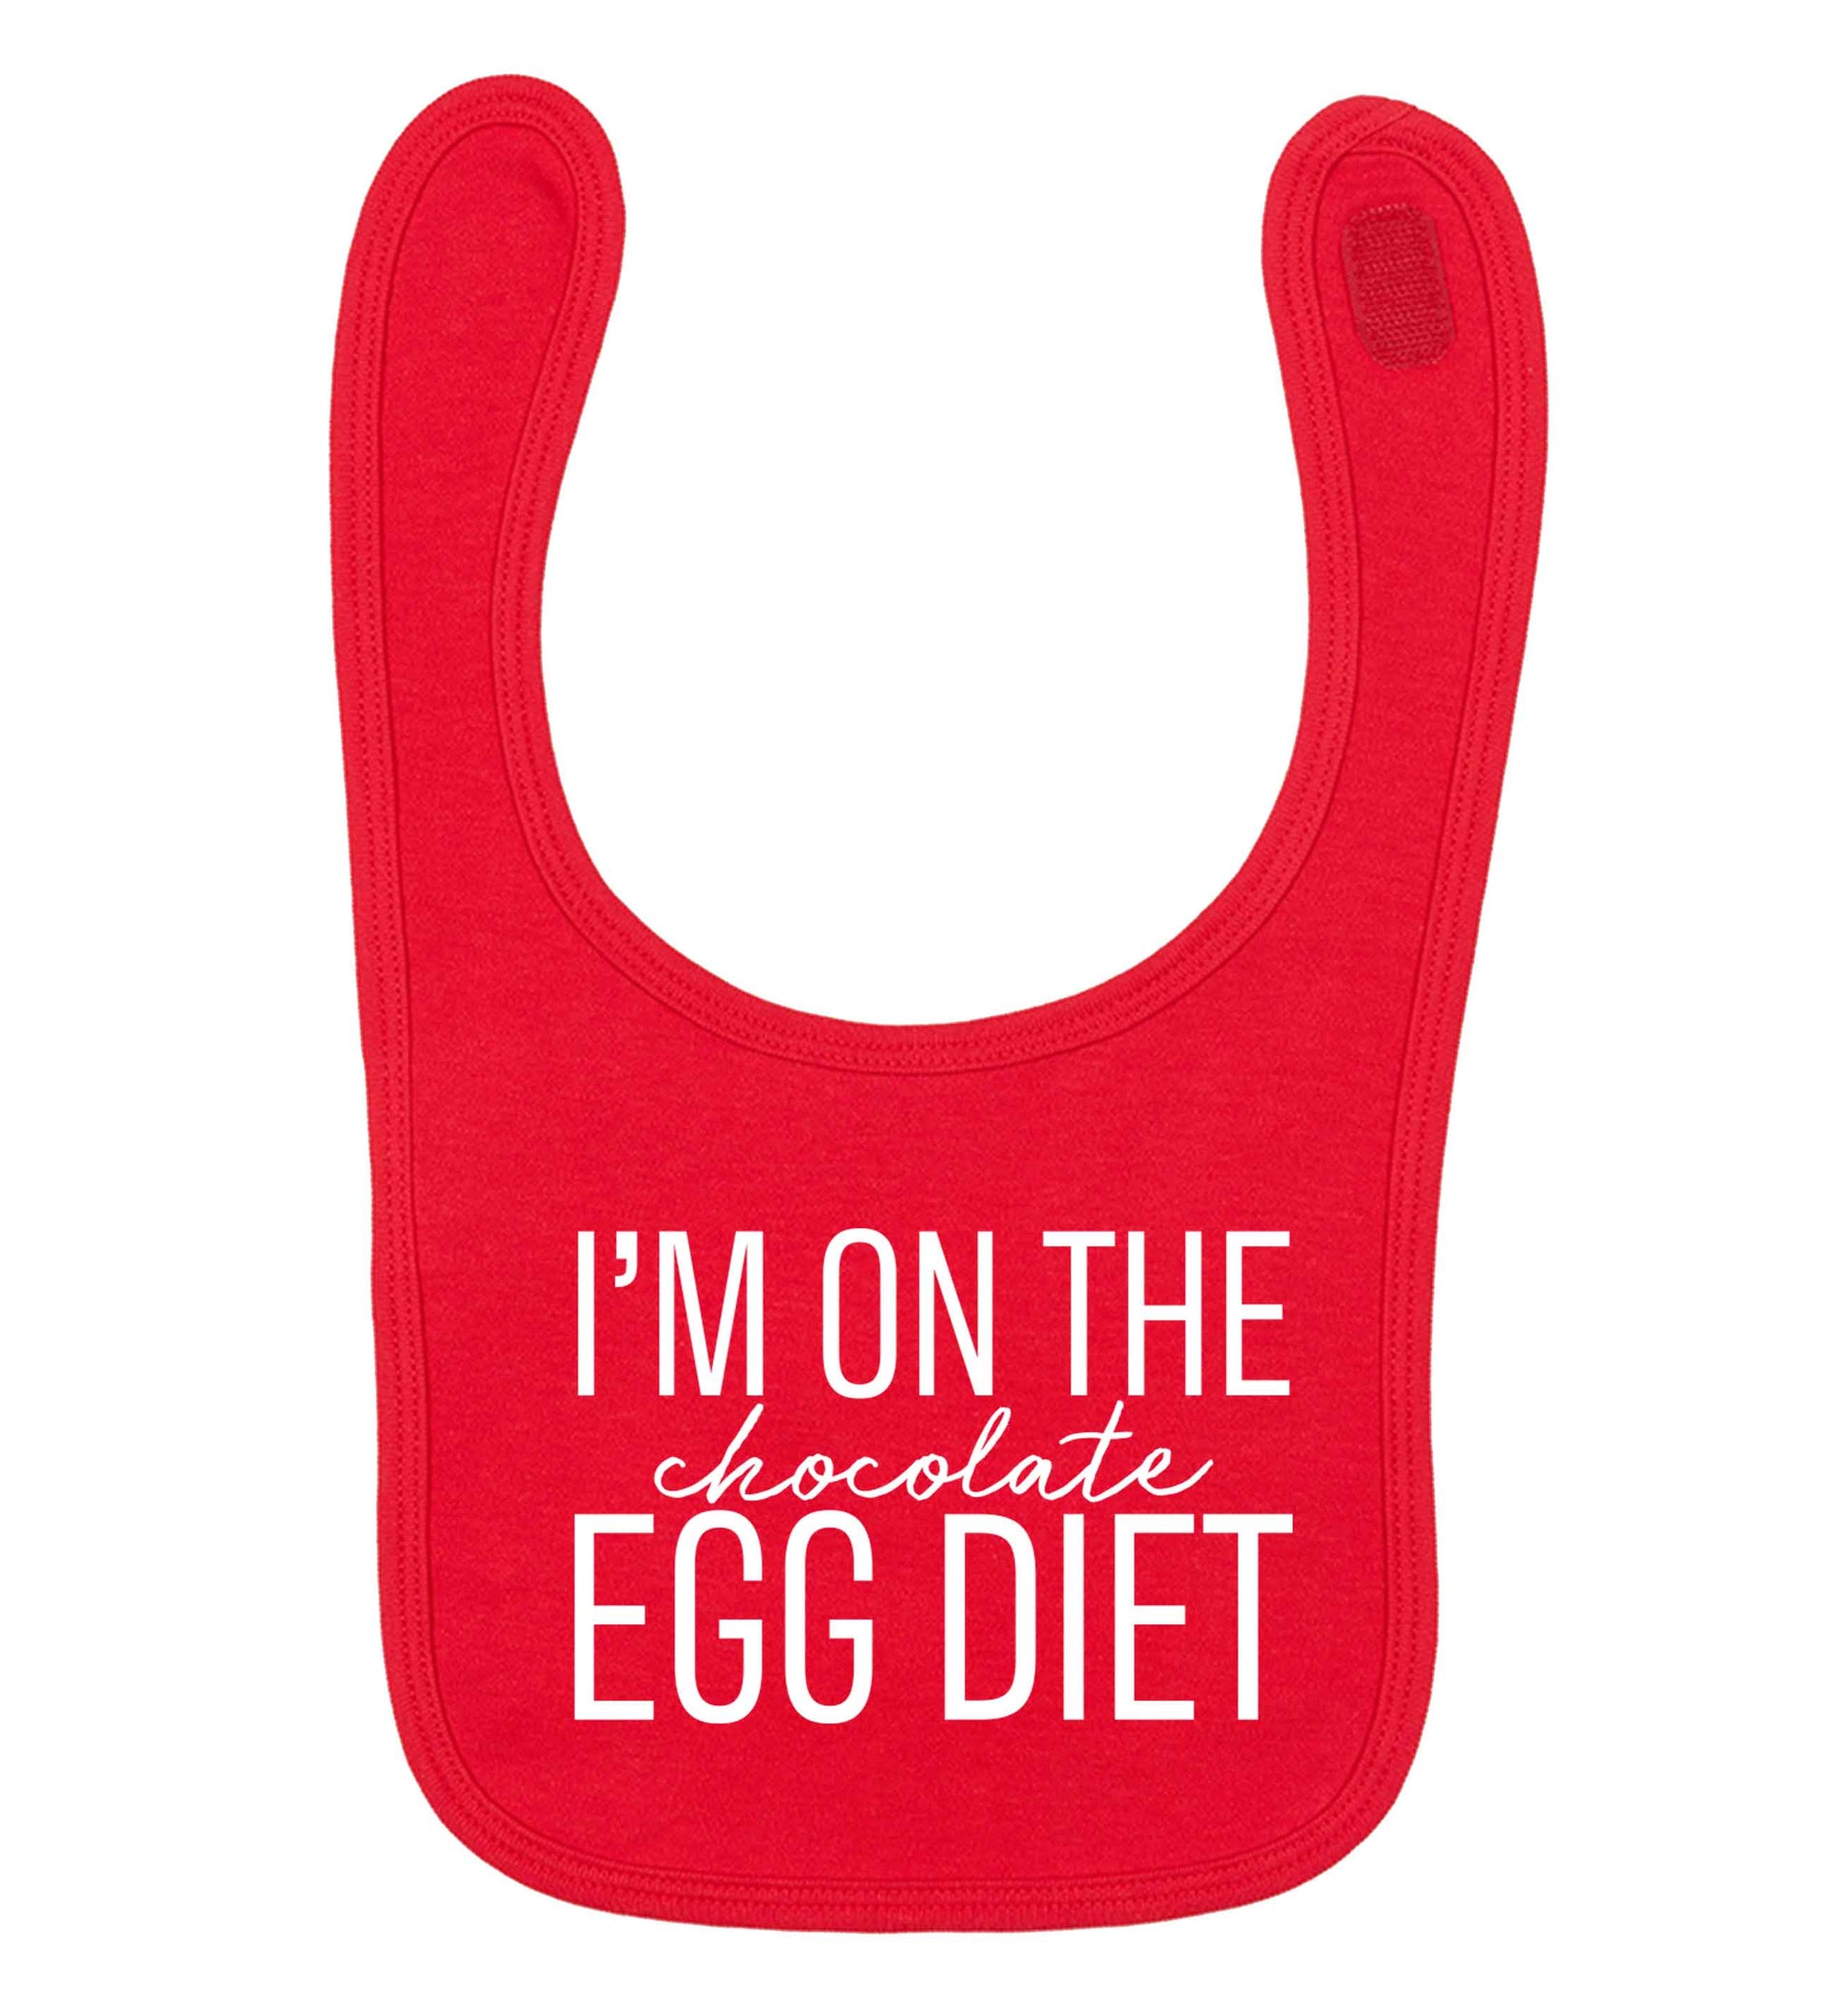 I'm on the chocolate egg diet red baby bib